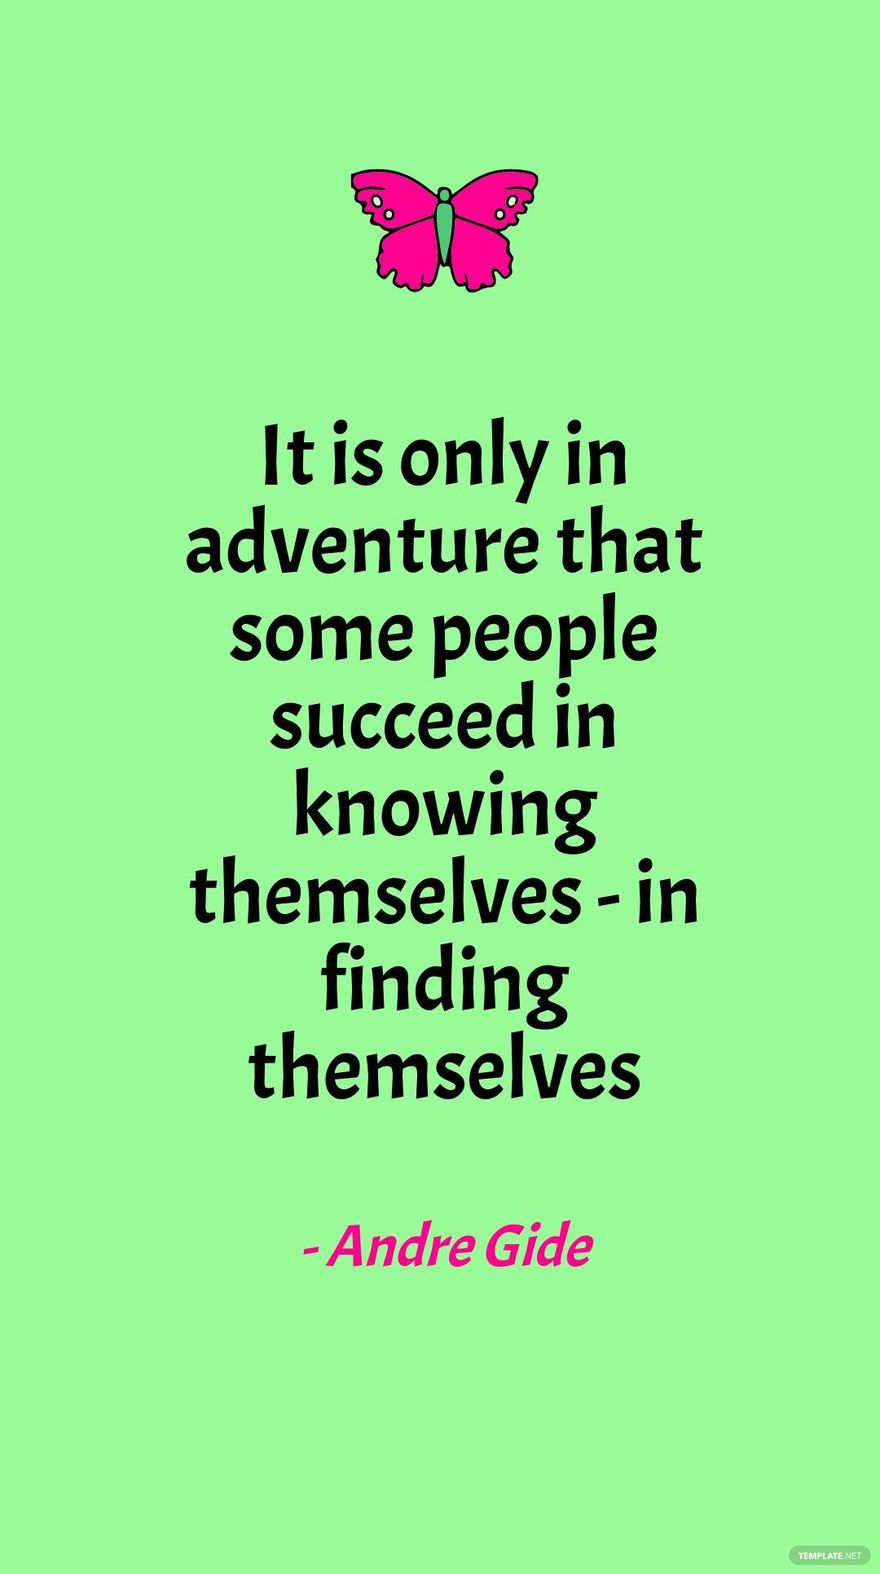 Andre Gide - It is only in adventure that some people succeed in knowing themselves - in finding themselves in JPG